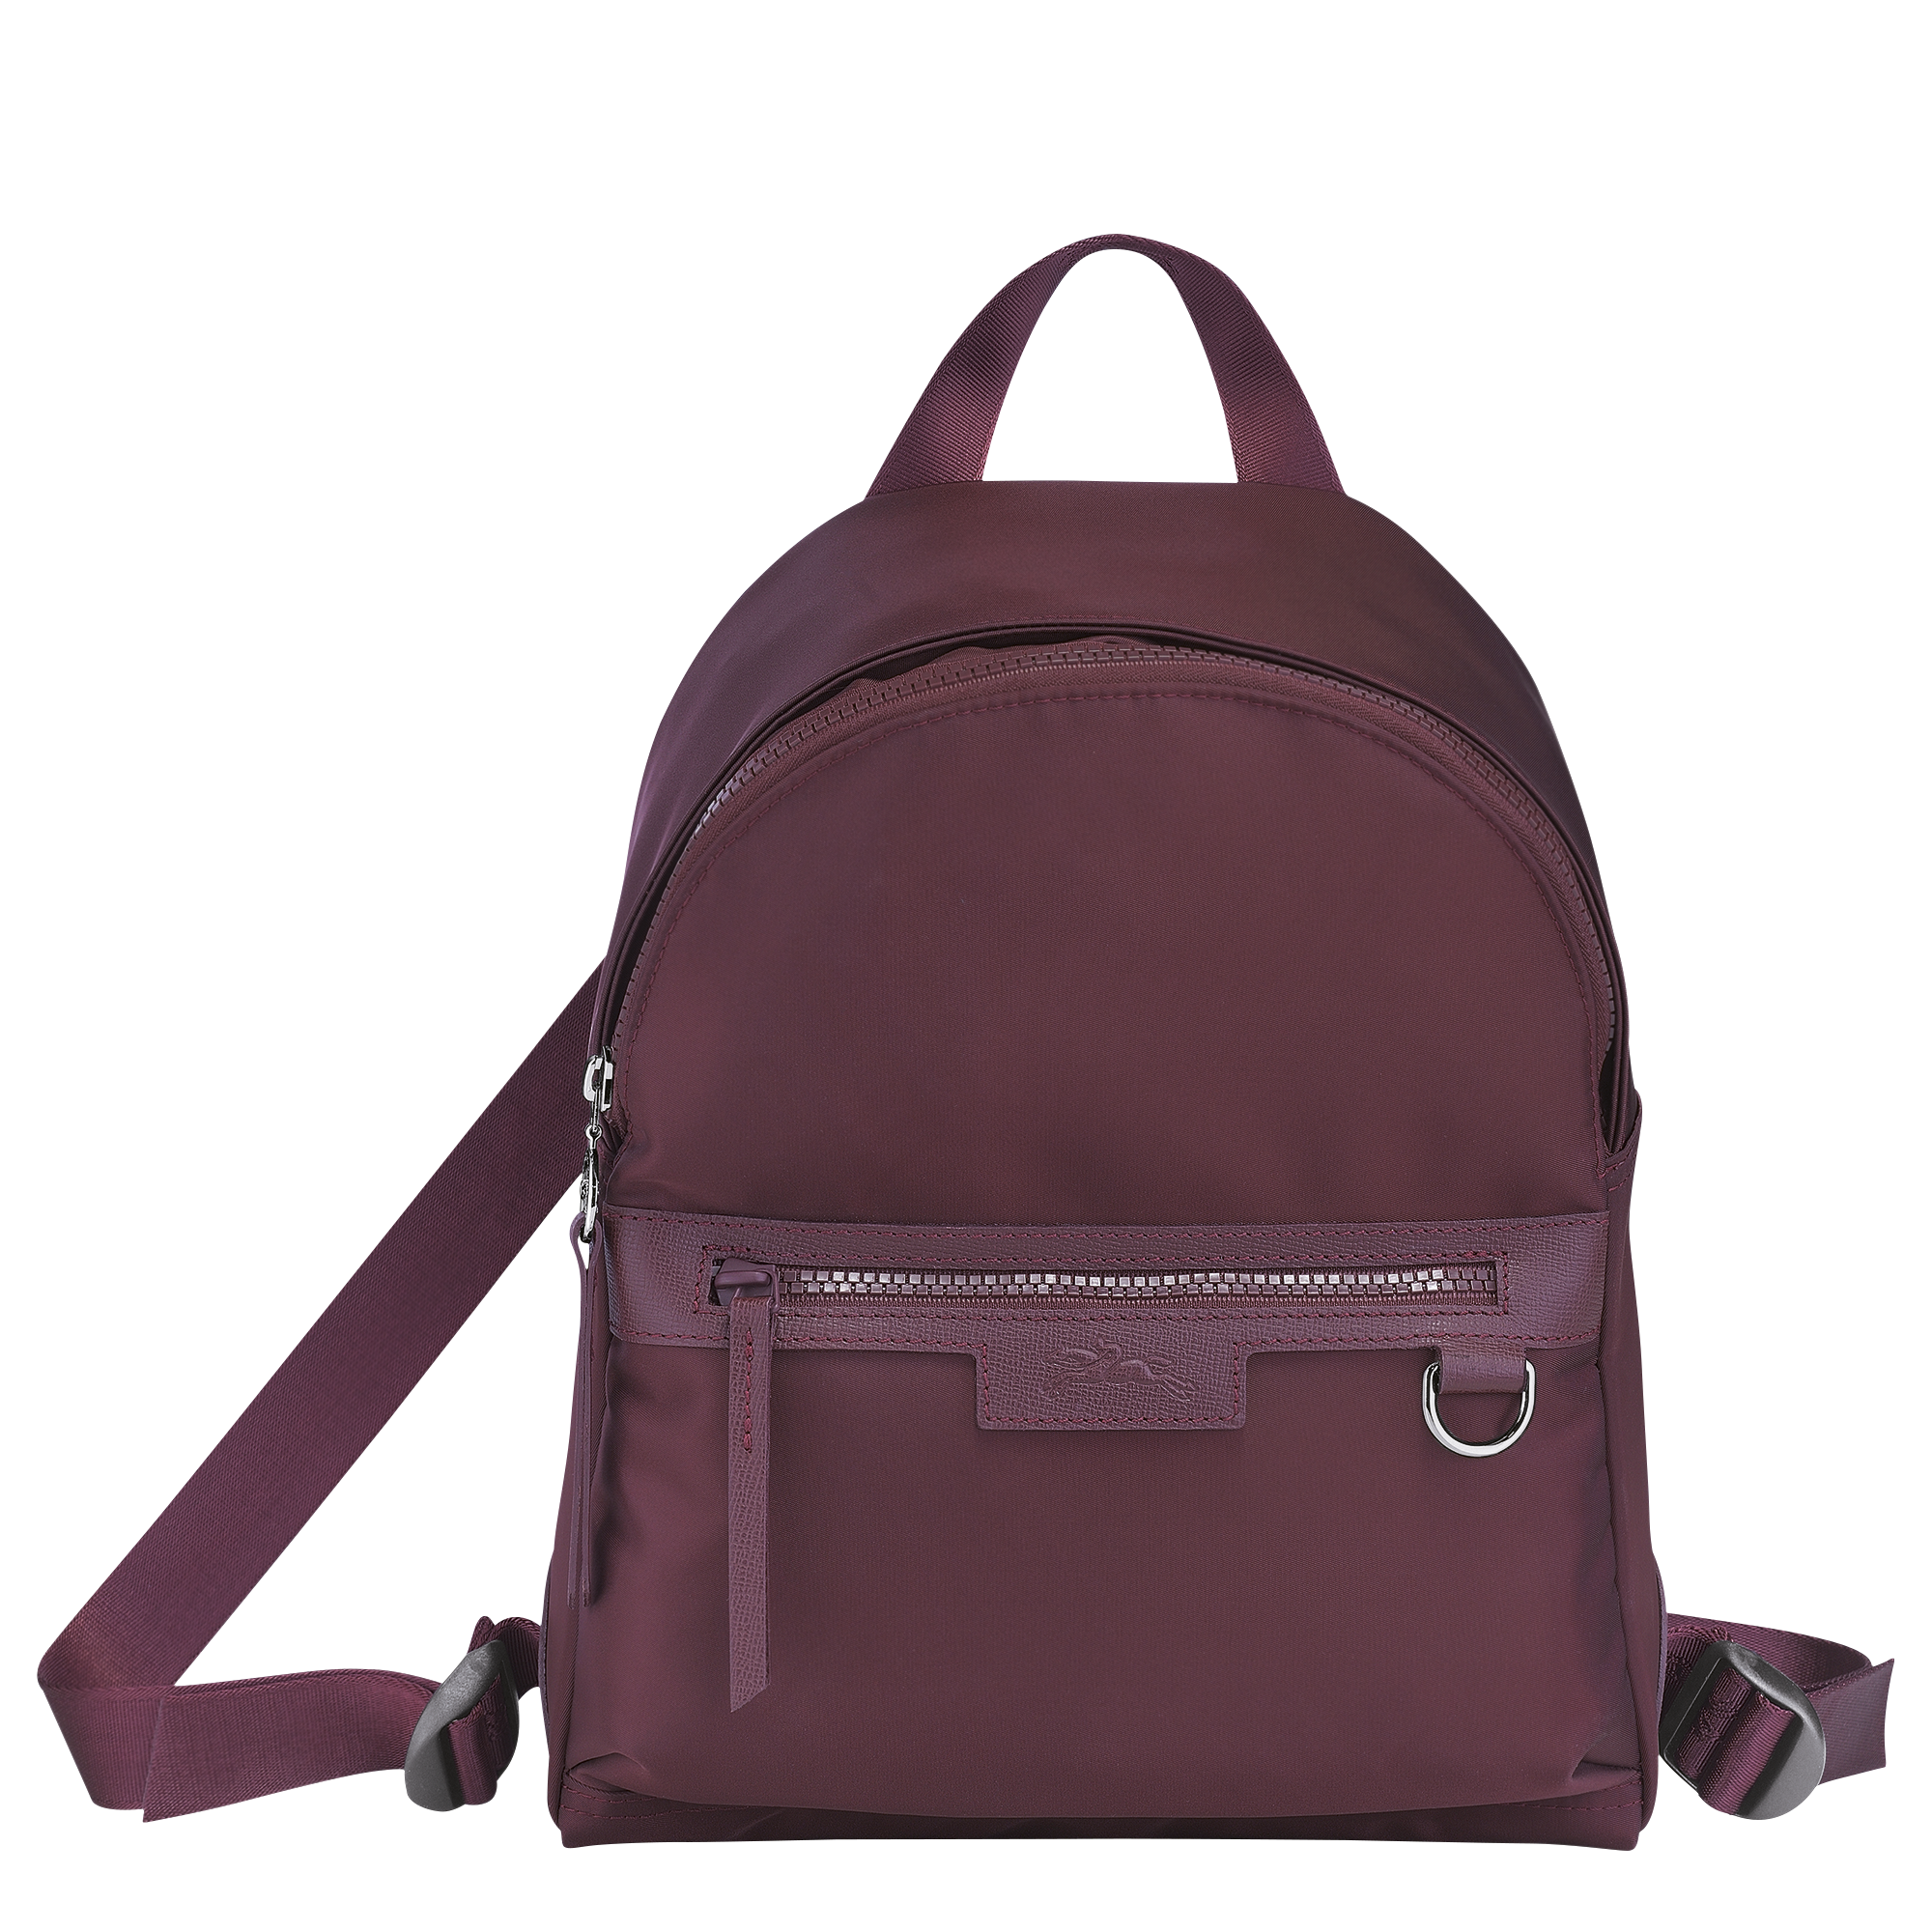 longchamp neo backpack review